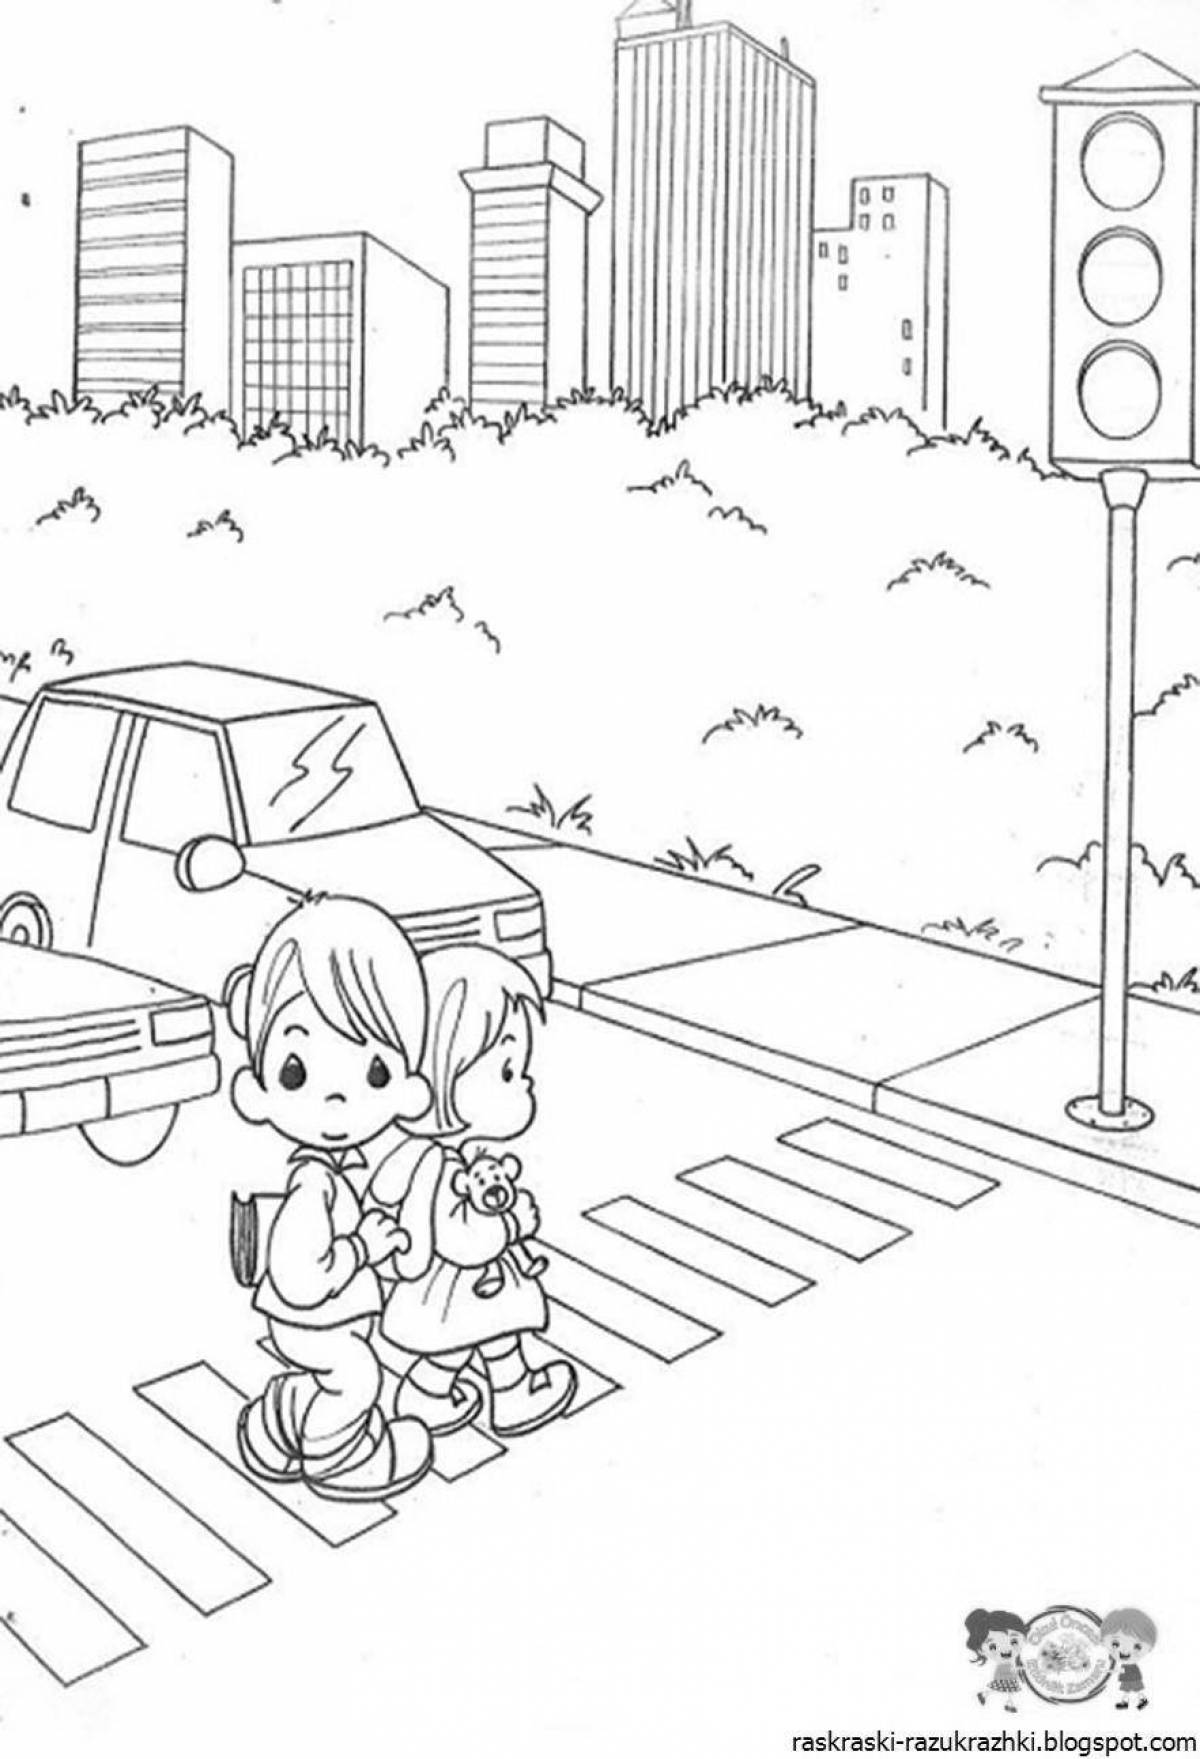 Zebra crossing coloring page